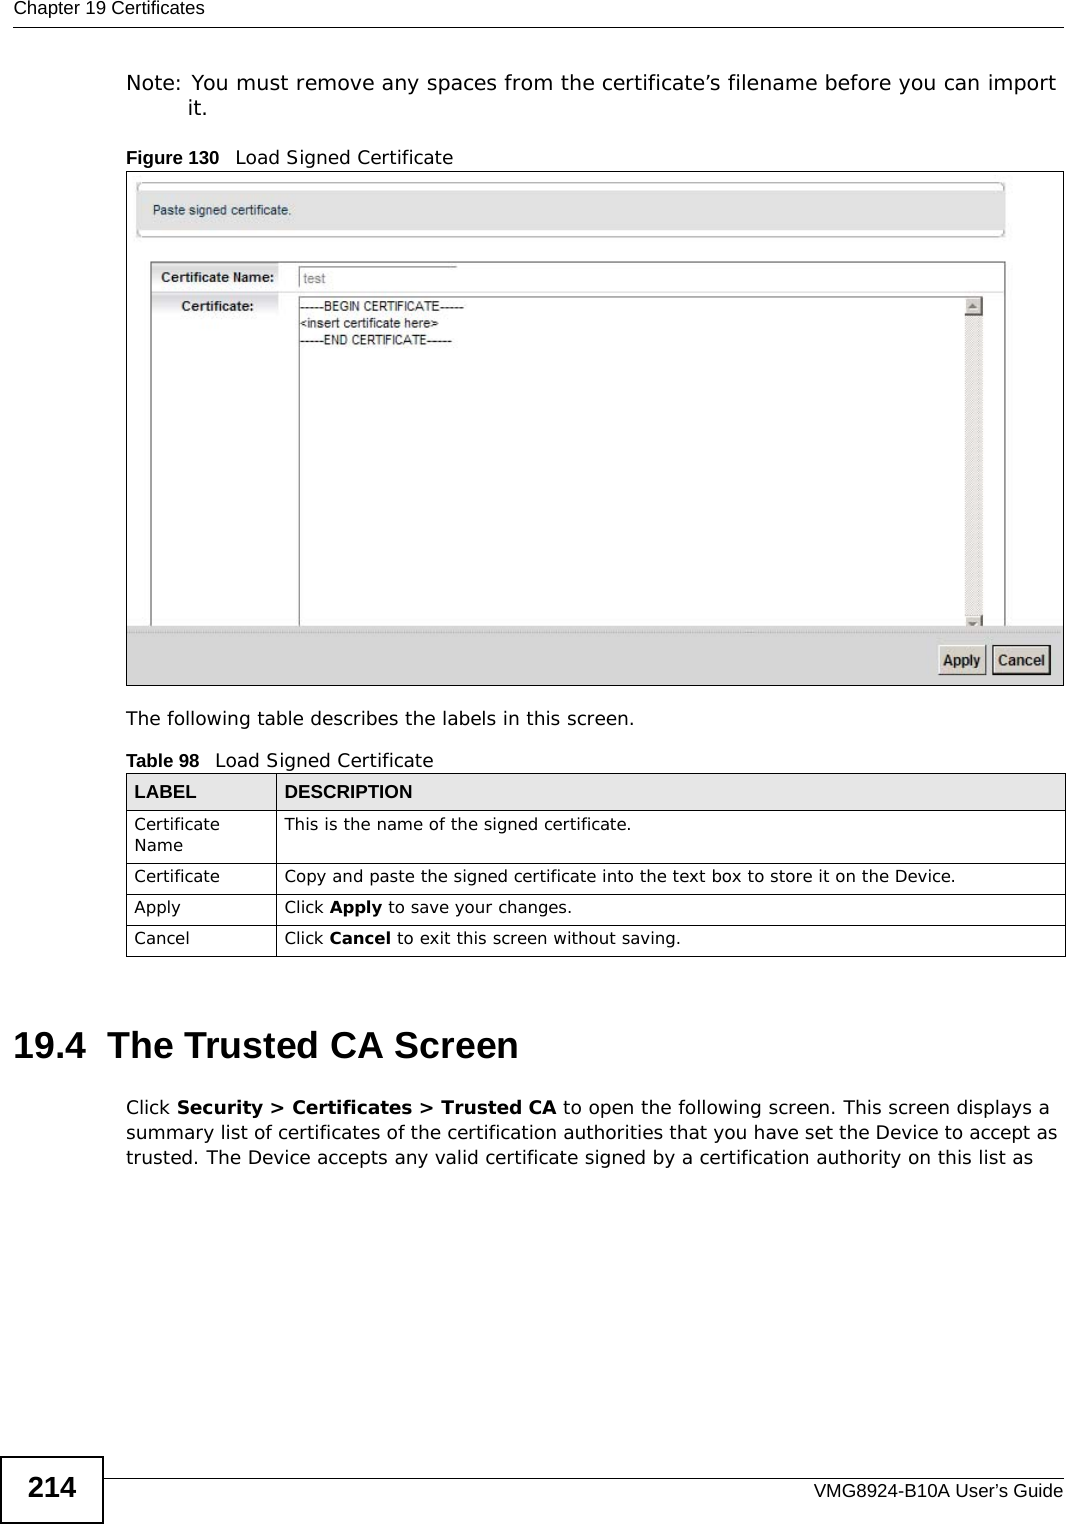 Chapter 19 CertificatesVMG8924-B10A User’s Guide214Note: You must remove any spaces from the certificate’s filename before you can import it.Figure 130   Load Signed Certificate The following table describes the labels in this screen. 19.4  The Trusted CA ScreenClick Security &gt; Certificates &gt; Trusted CA to open the following screen. This screen displays a summary list of certificates of the certification authorities that you have set the Device to accept as trusted. The Device accepts any valid certificate signed by a certification authority on this list as Table 98   Load Signed CertificateLABEL DESCRIPTIONCertificate Name This is the name of the signed certificate. Certificate Copy and paste the signed certificate into the text box to store it on the Device.Apply Click Apply to save your changes.Cancel Click Cancel to exit this screen without saving.